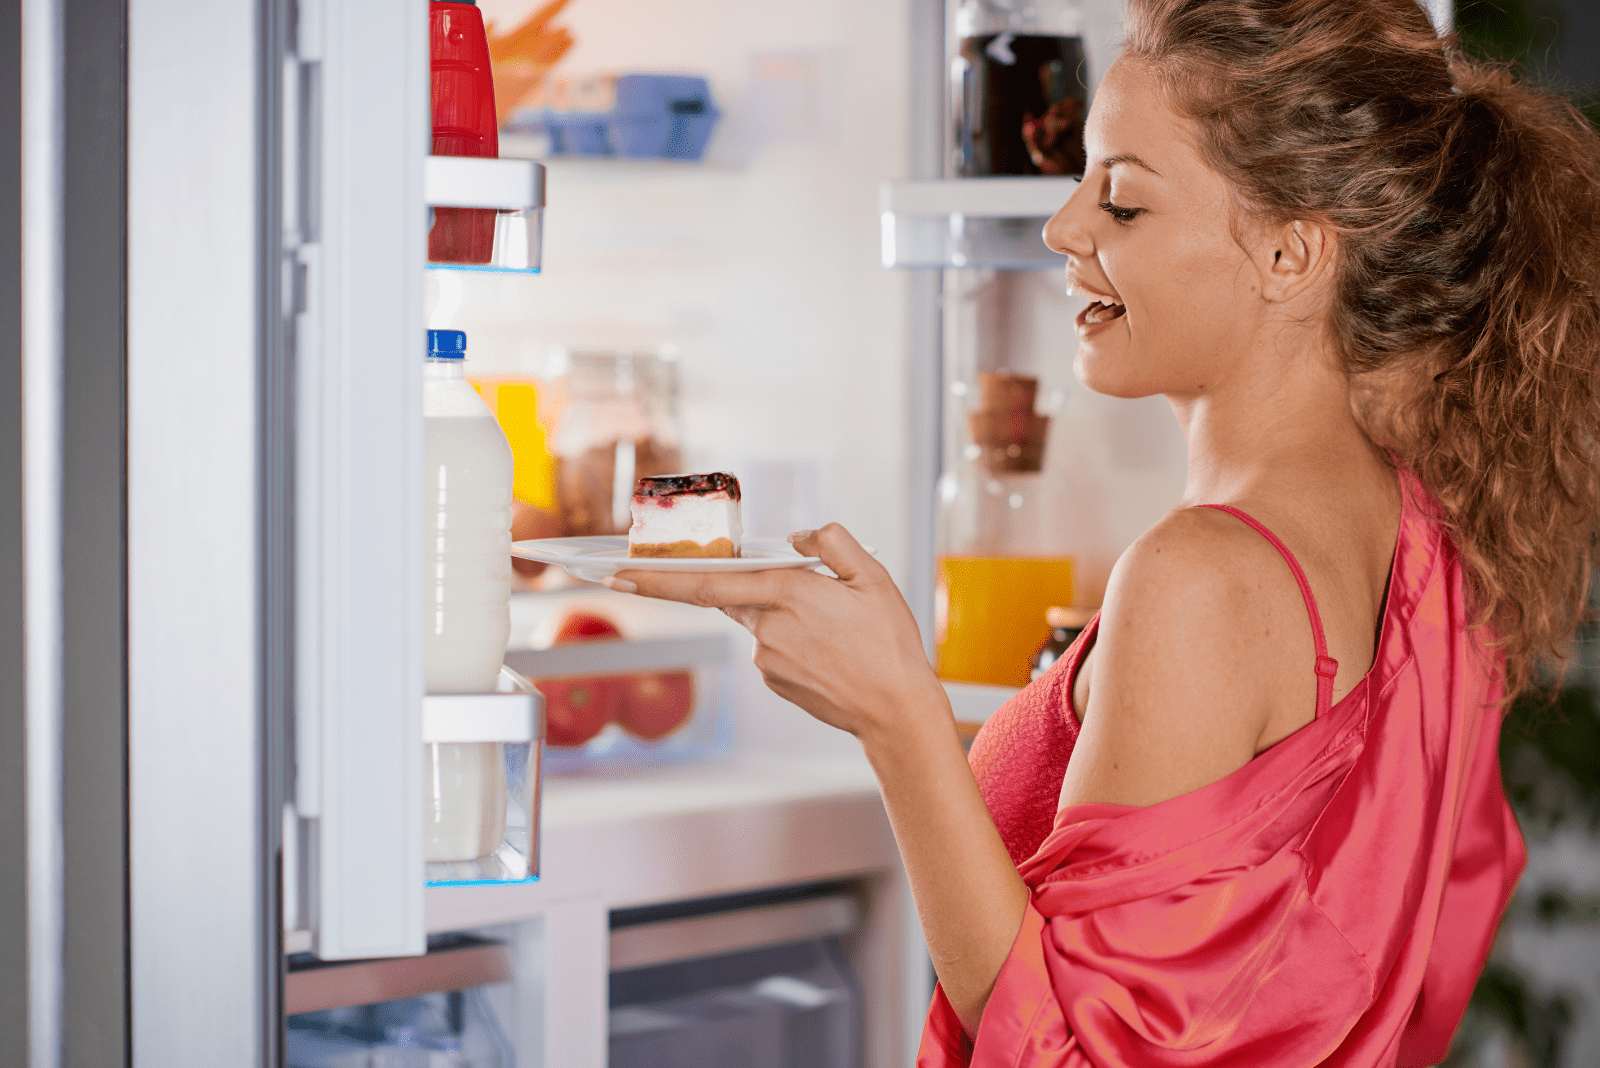 a smiling woman takes a cake from the fridge